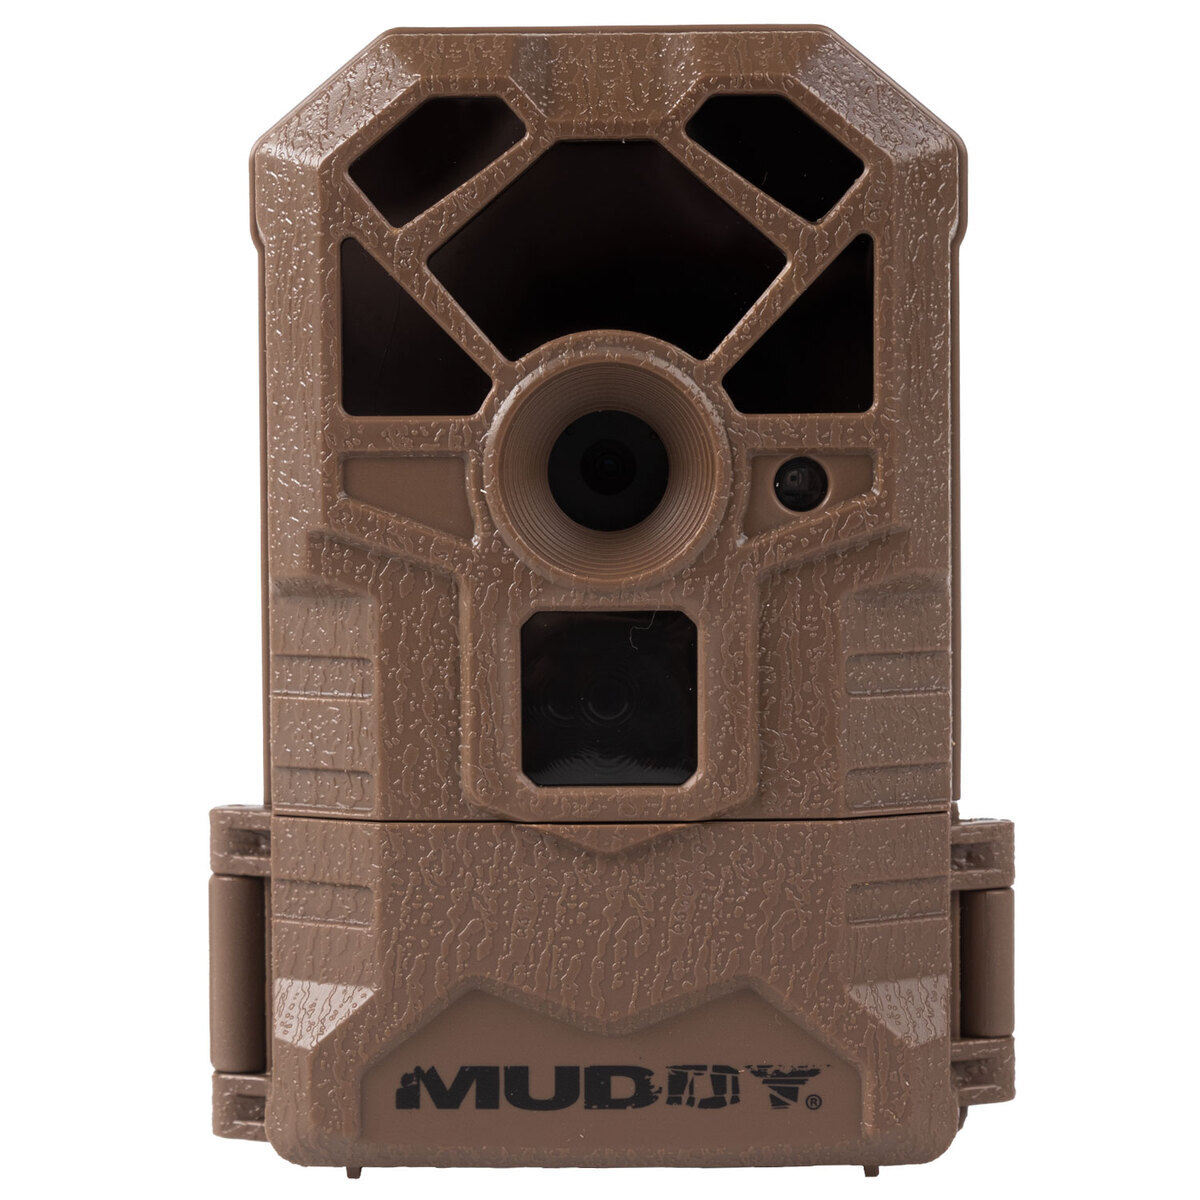 Ambacht formaat fout Muddy Outdoors Pro-Cam 14MP Trail Camera | Sportsman's Warehouse